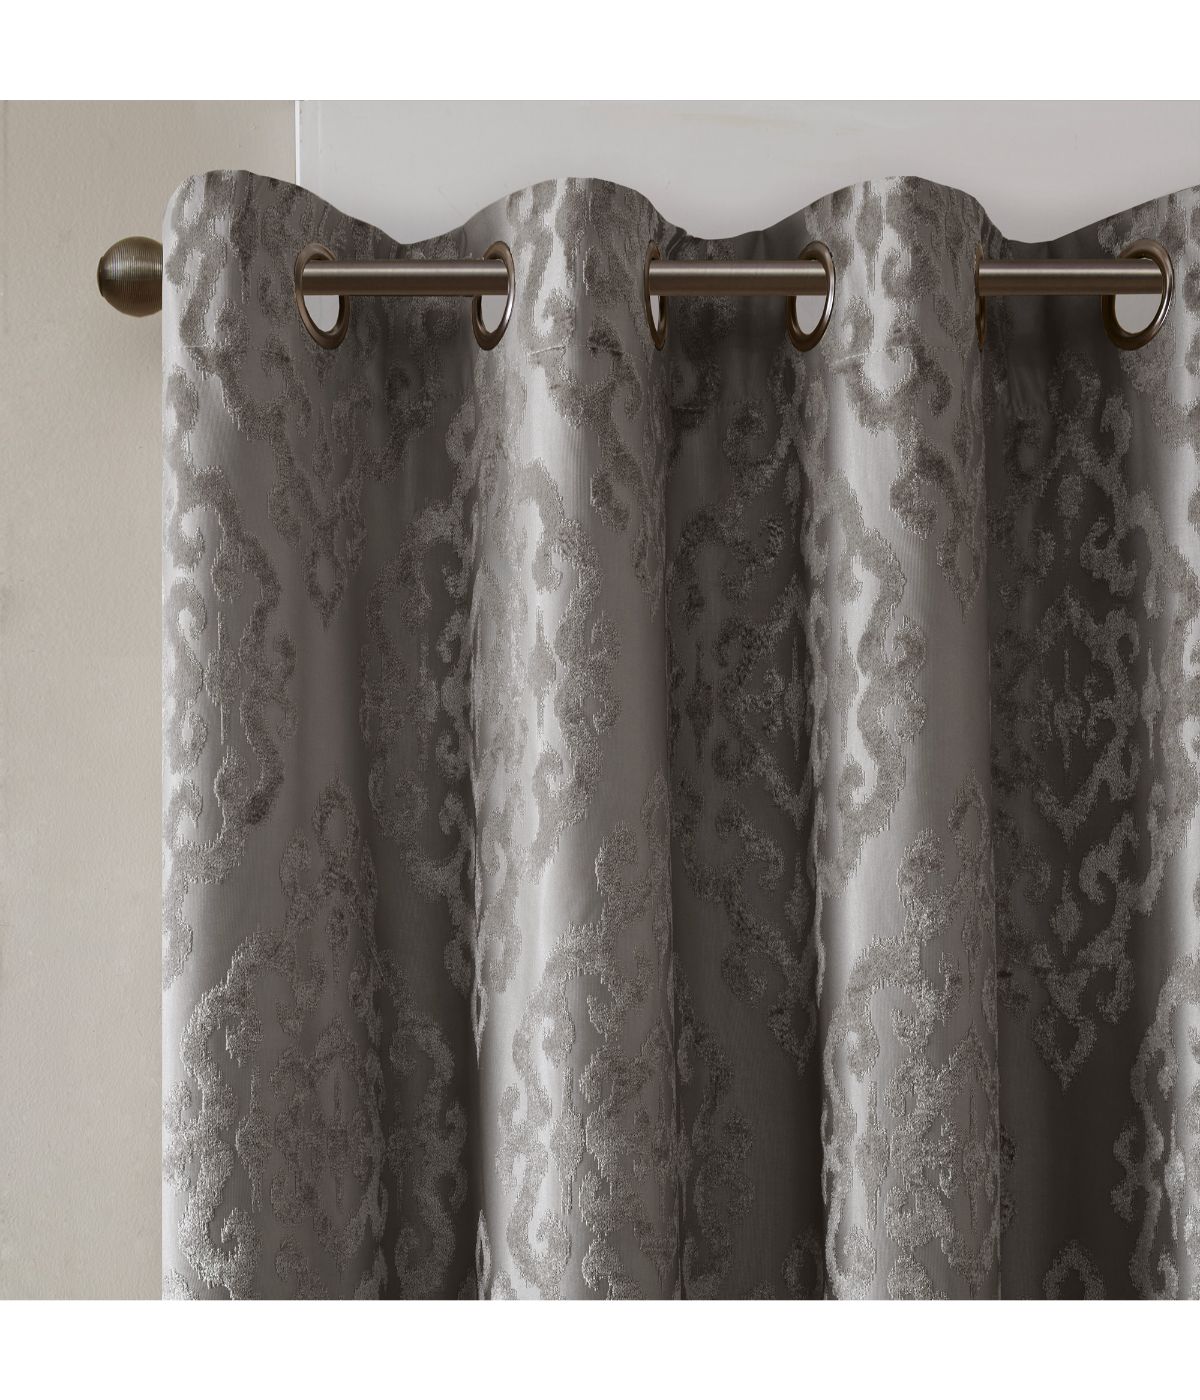 Azalea Knitted Jacquard Damask Total Blackout Grommet Top Curtain Panel Charcoal